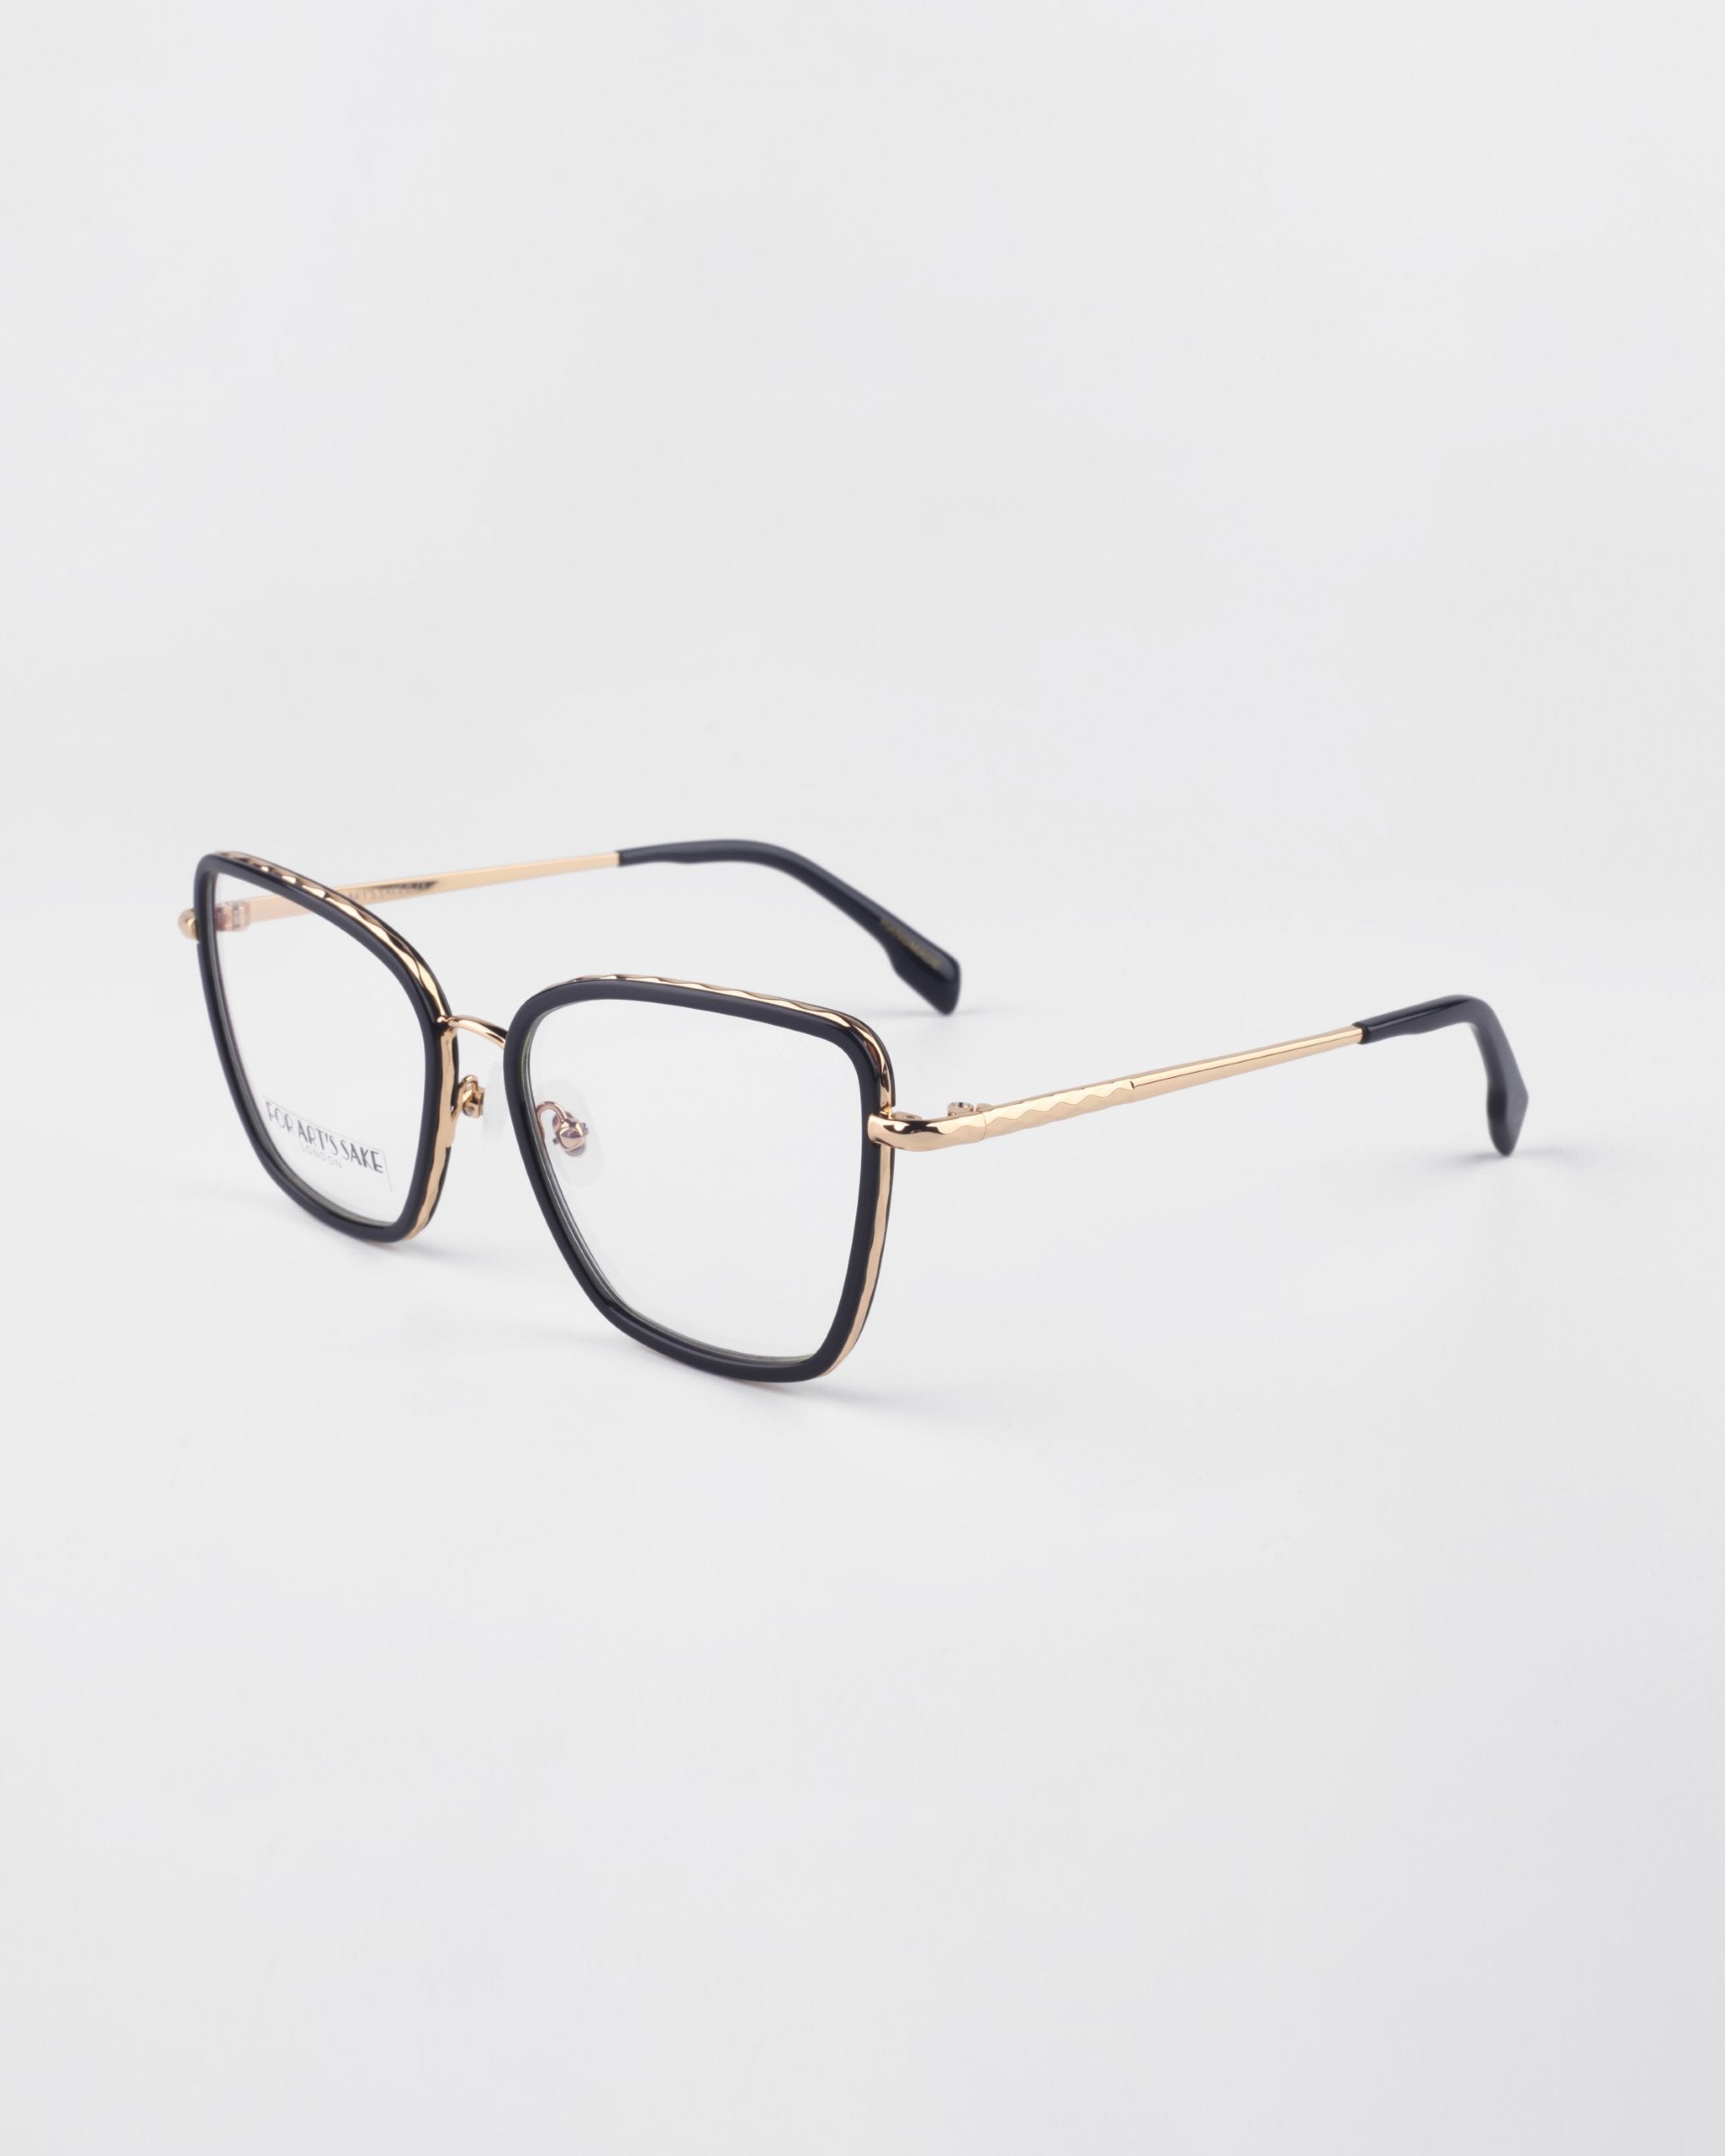 A pair of Lace eyeglasses by For Art's Sake® with a sleek black frame and 18-karat gold-plated arms. The glasses, featuring prescription lenses, rest on a white background, angled to show both the front and side views of the stylish frame.